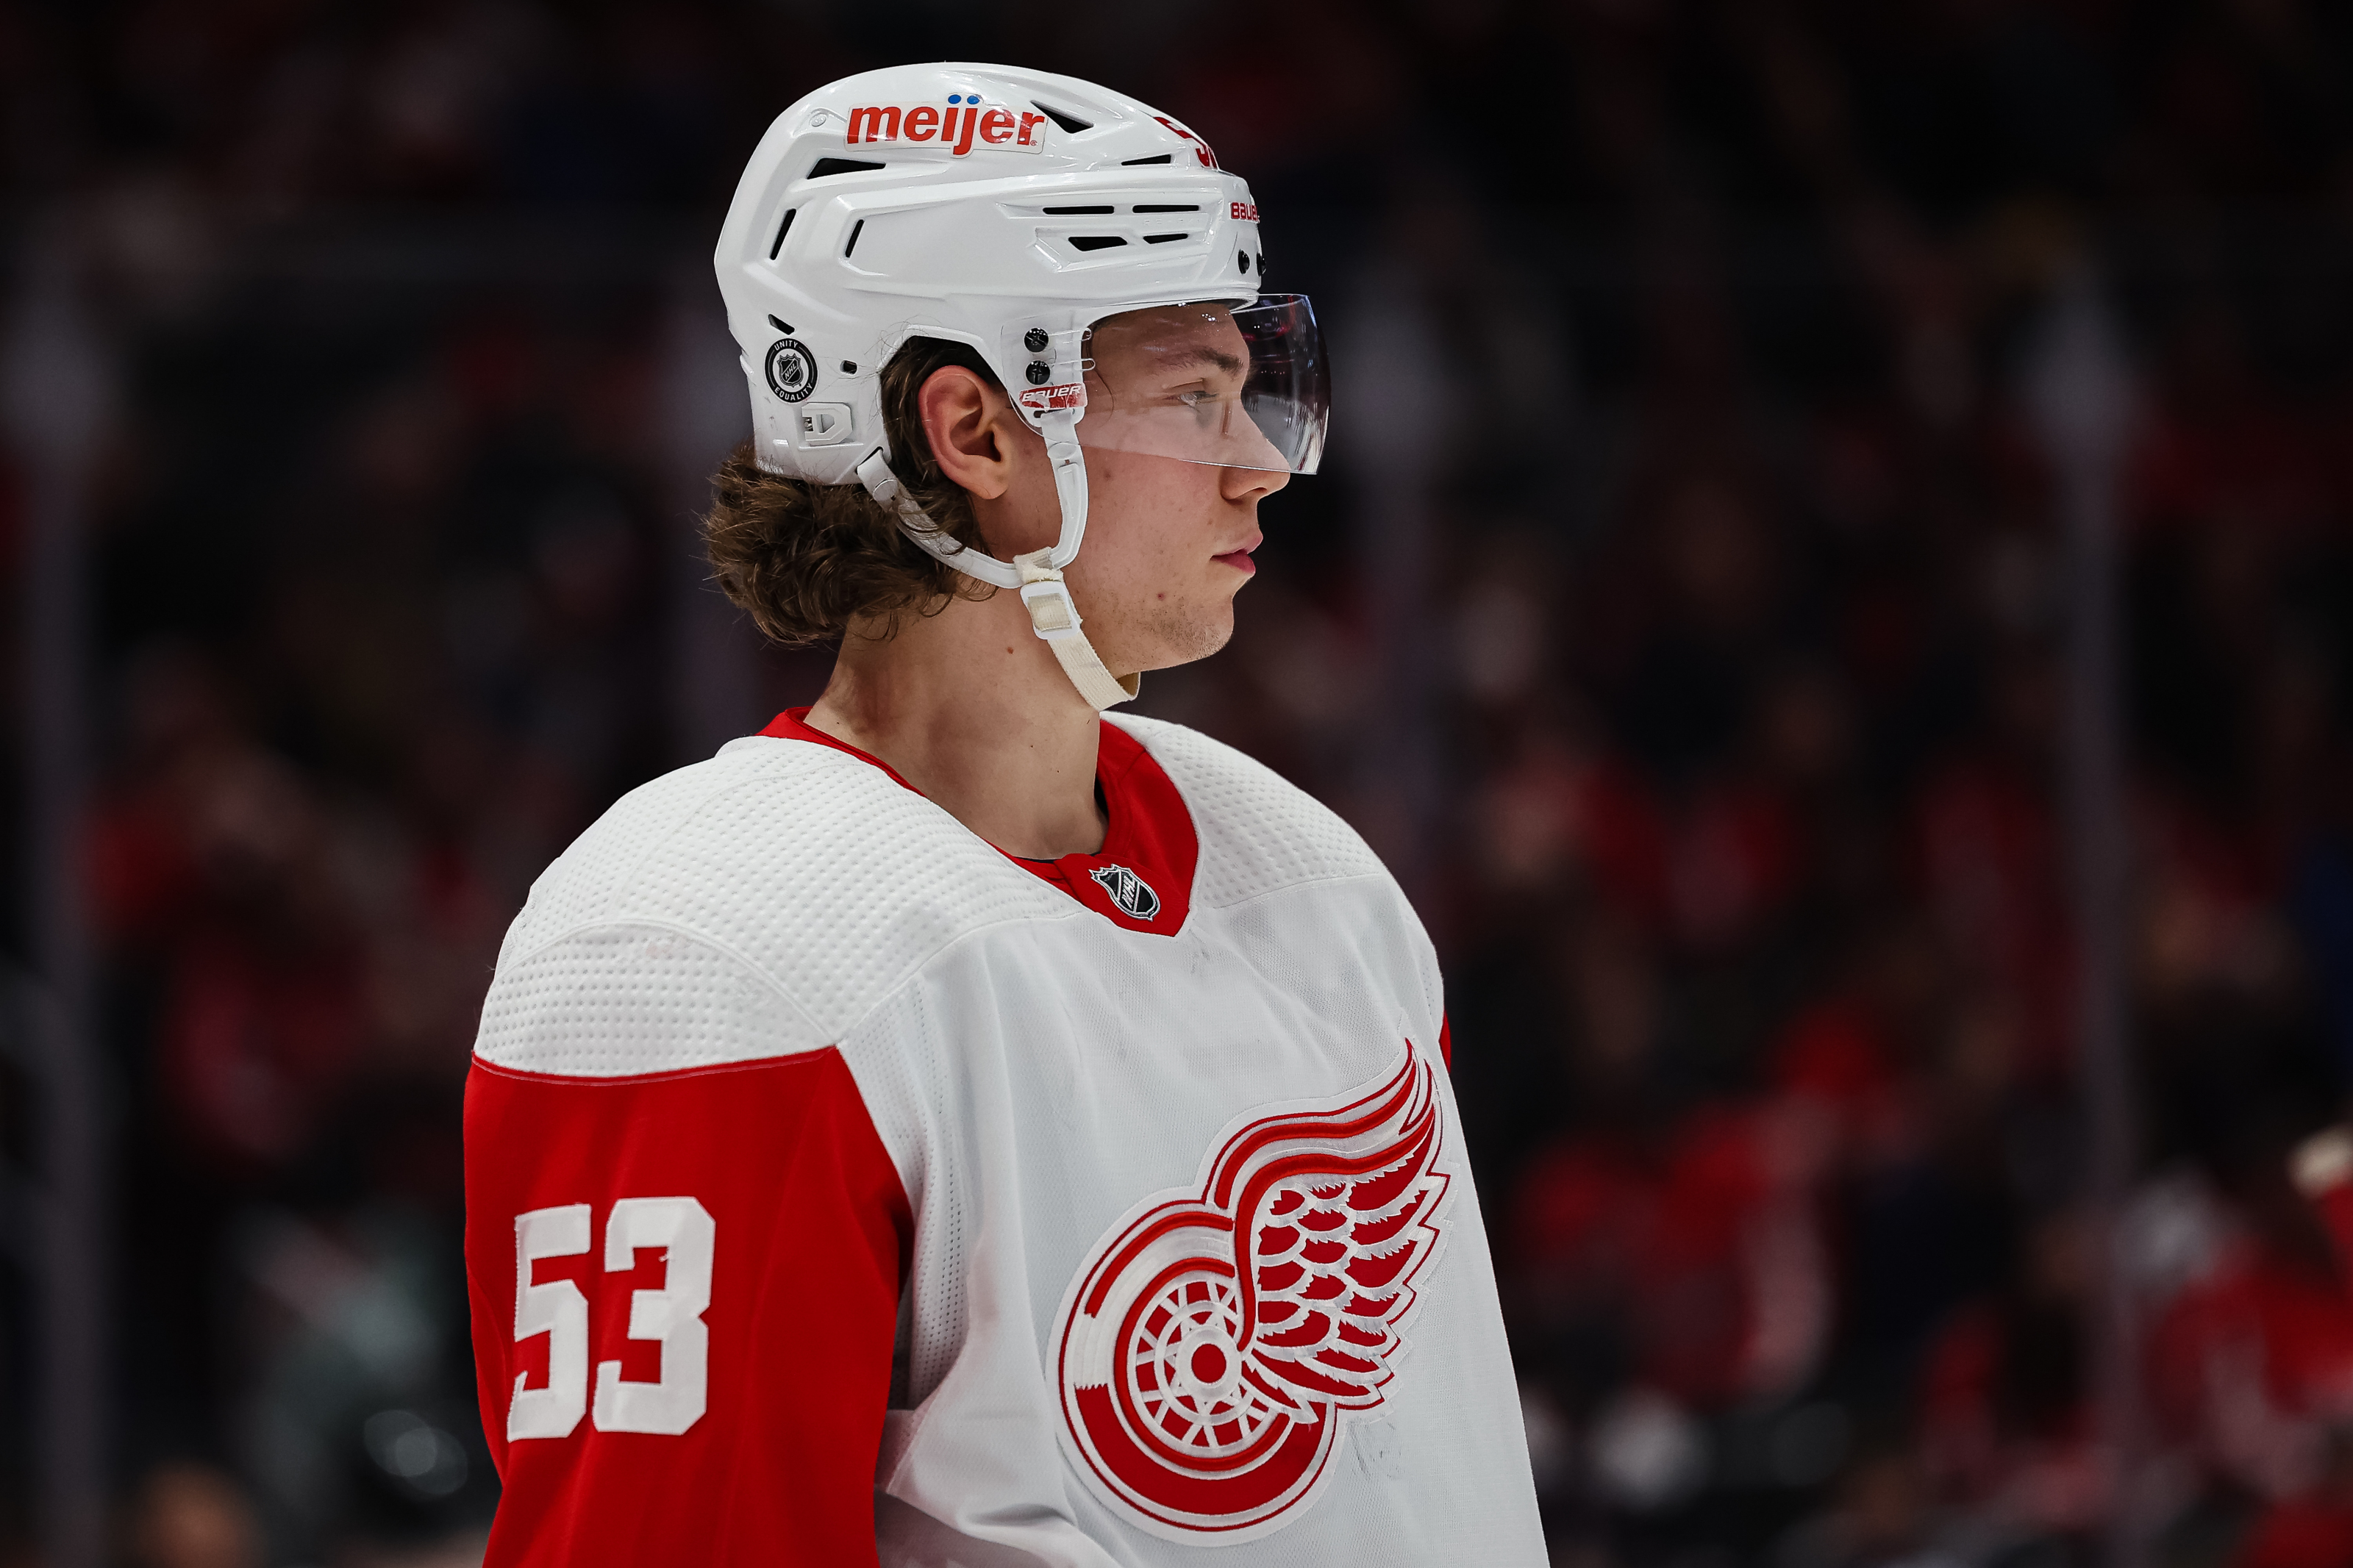 Detroit Red Wings Seider Struggles in Year Two, Potential Still There